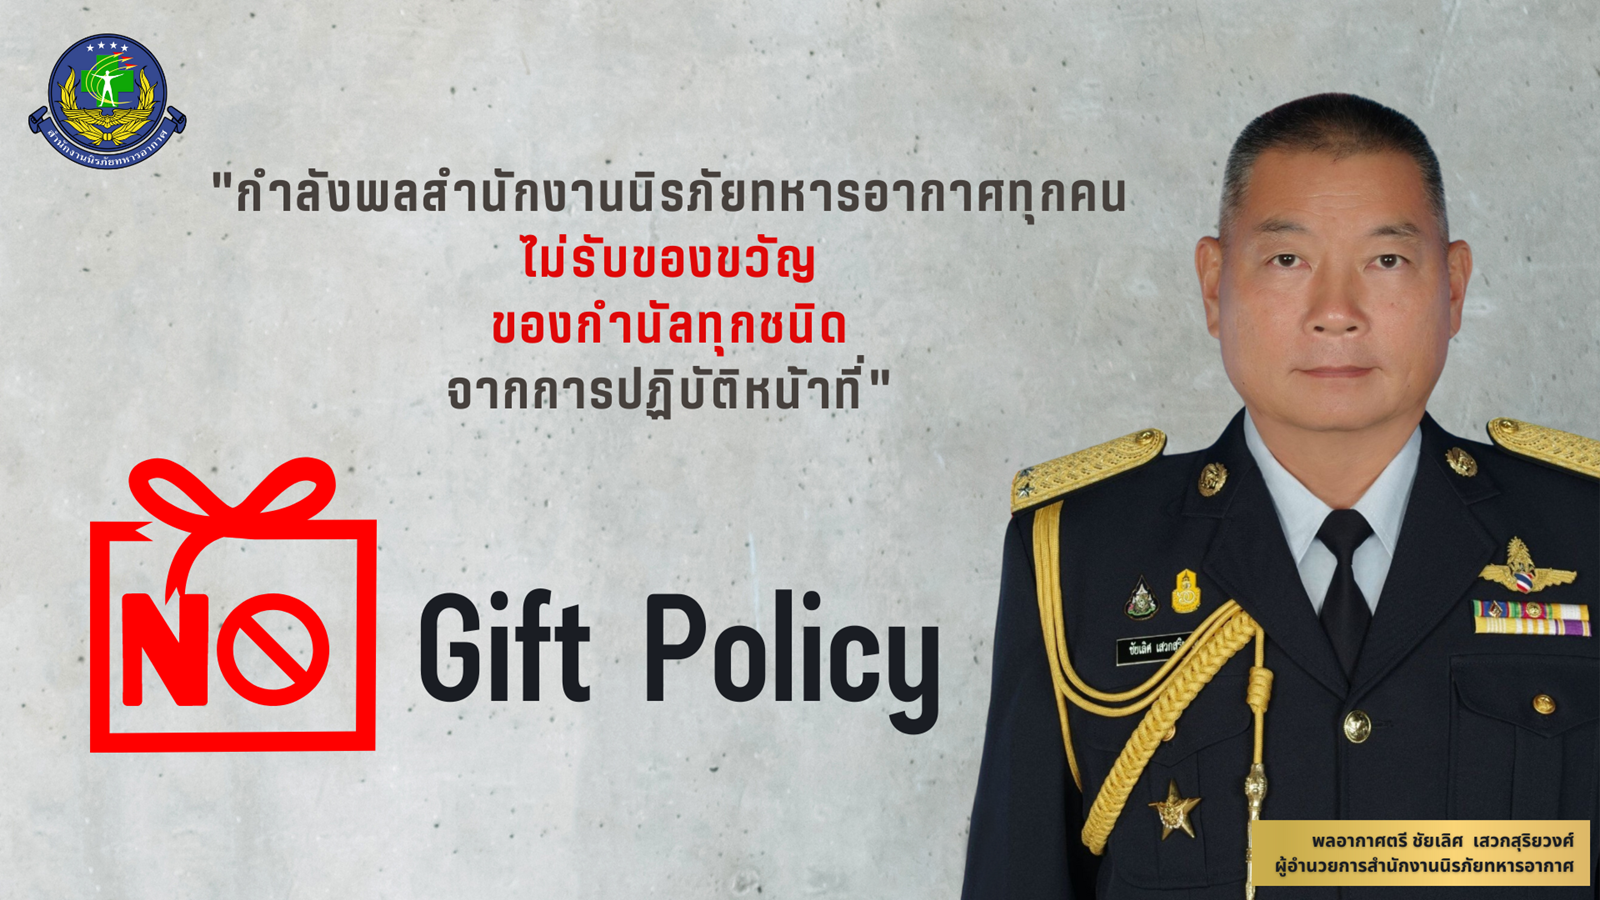 No Gift Policy 67